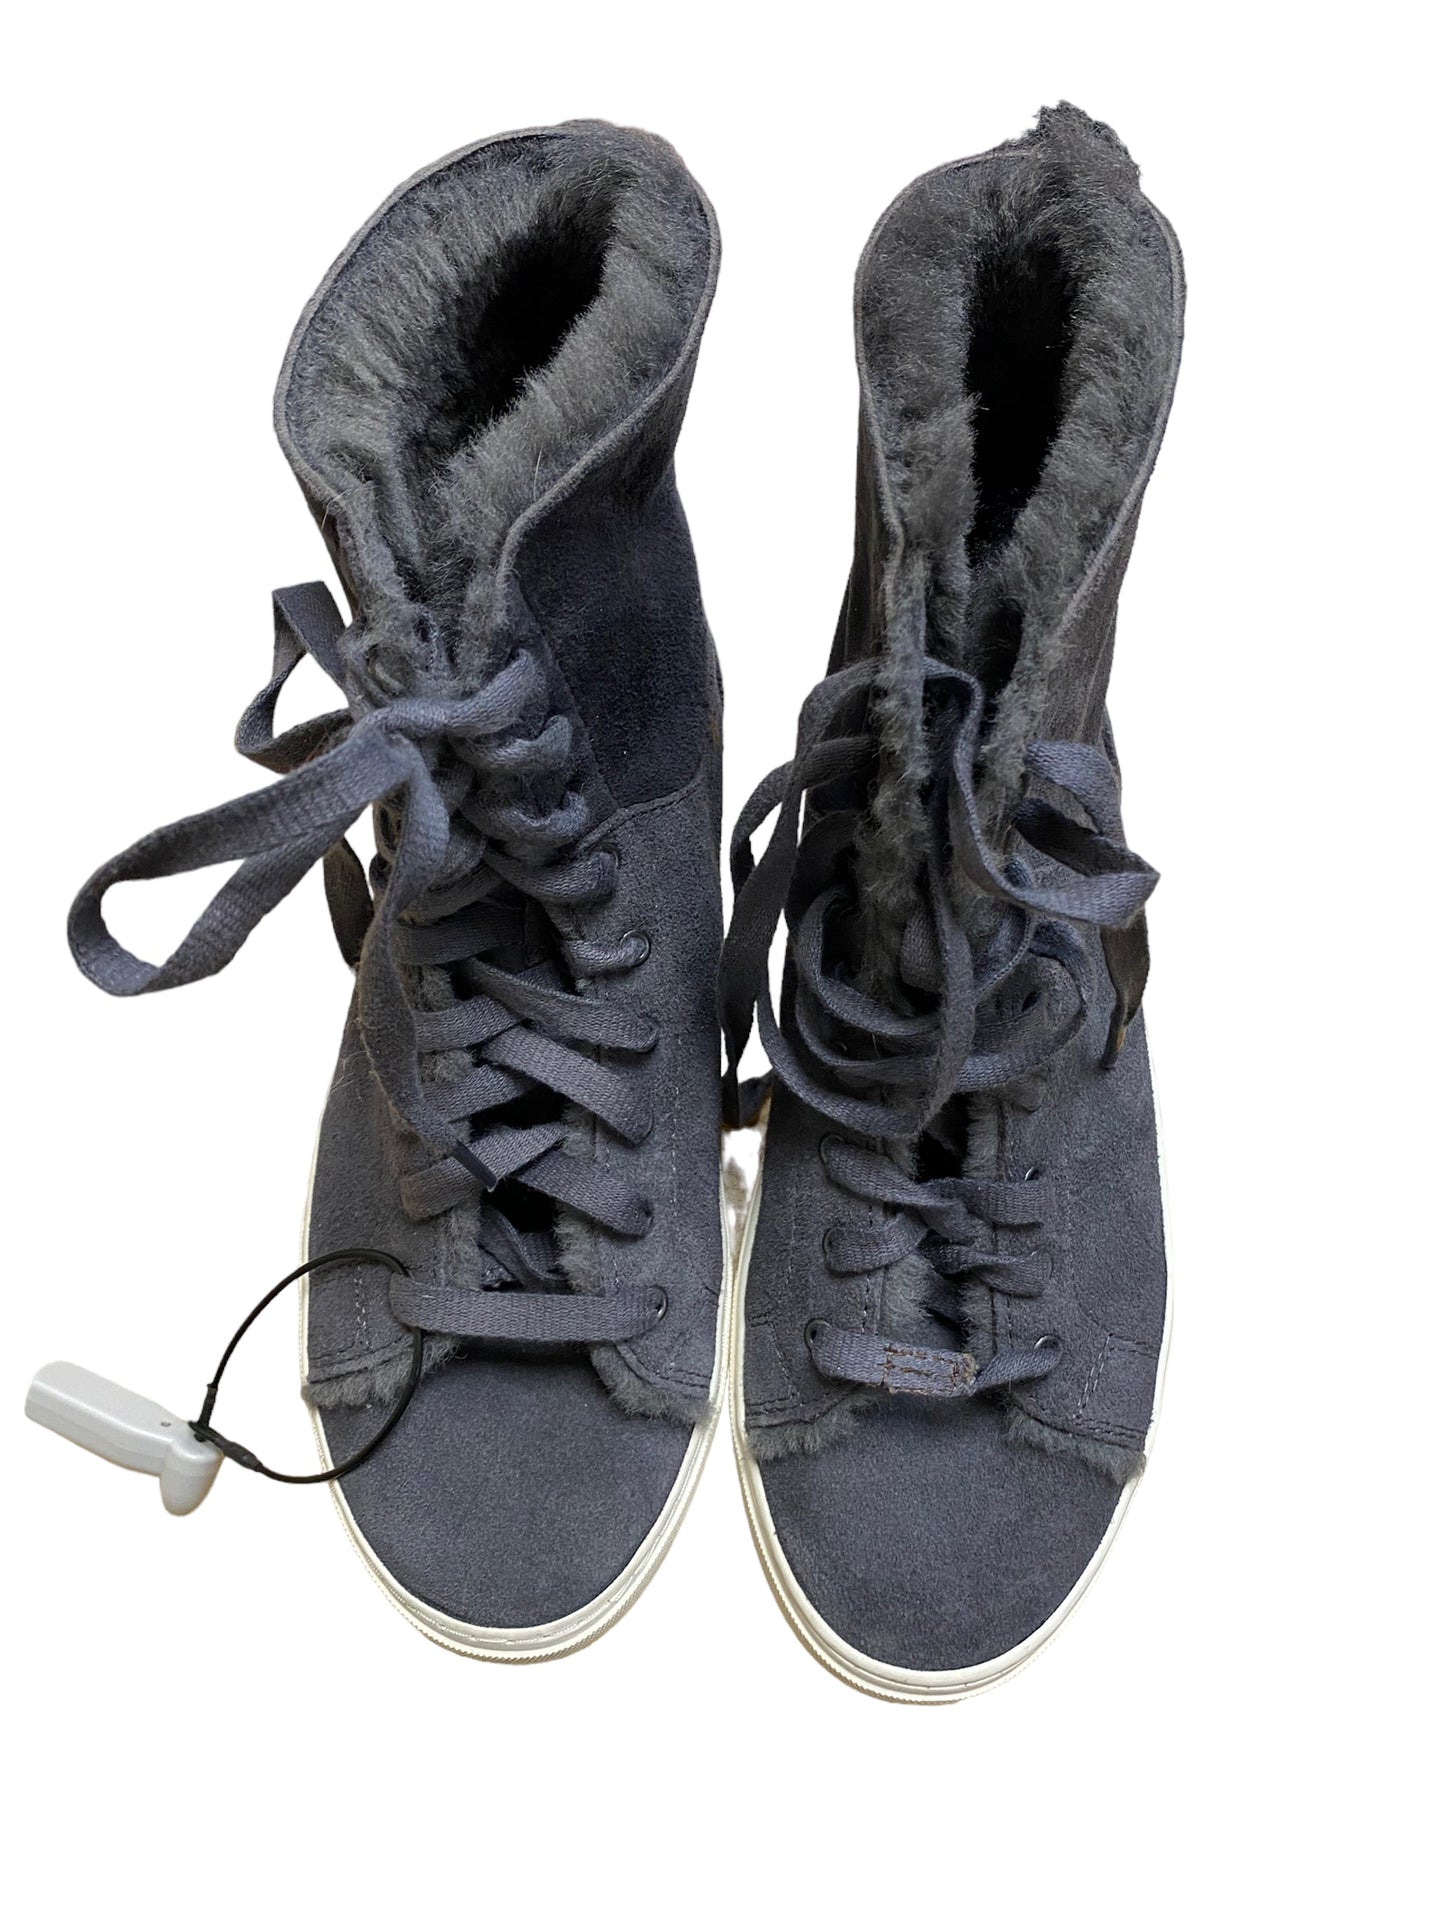 Shoes Sneakers By Ugg  Size: 7